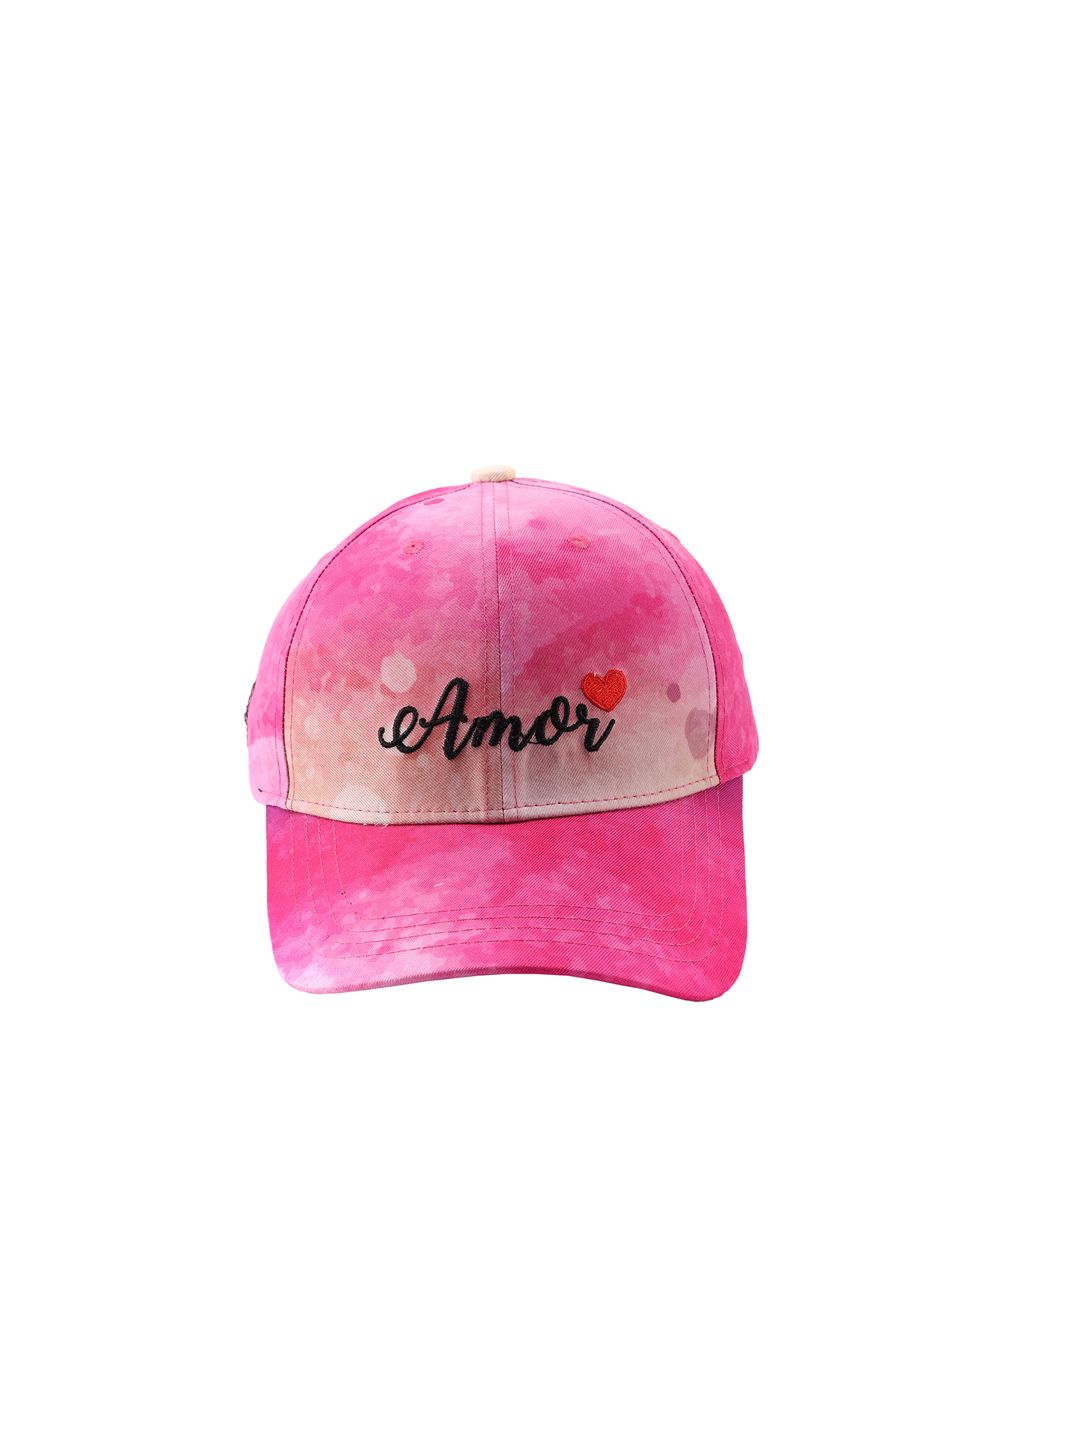 Cap Shap Unisex Pink Embroidered Baseball Cap Price in India